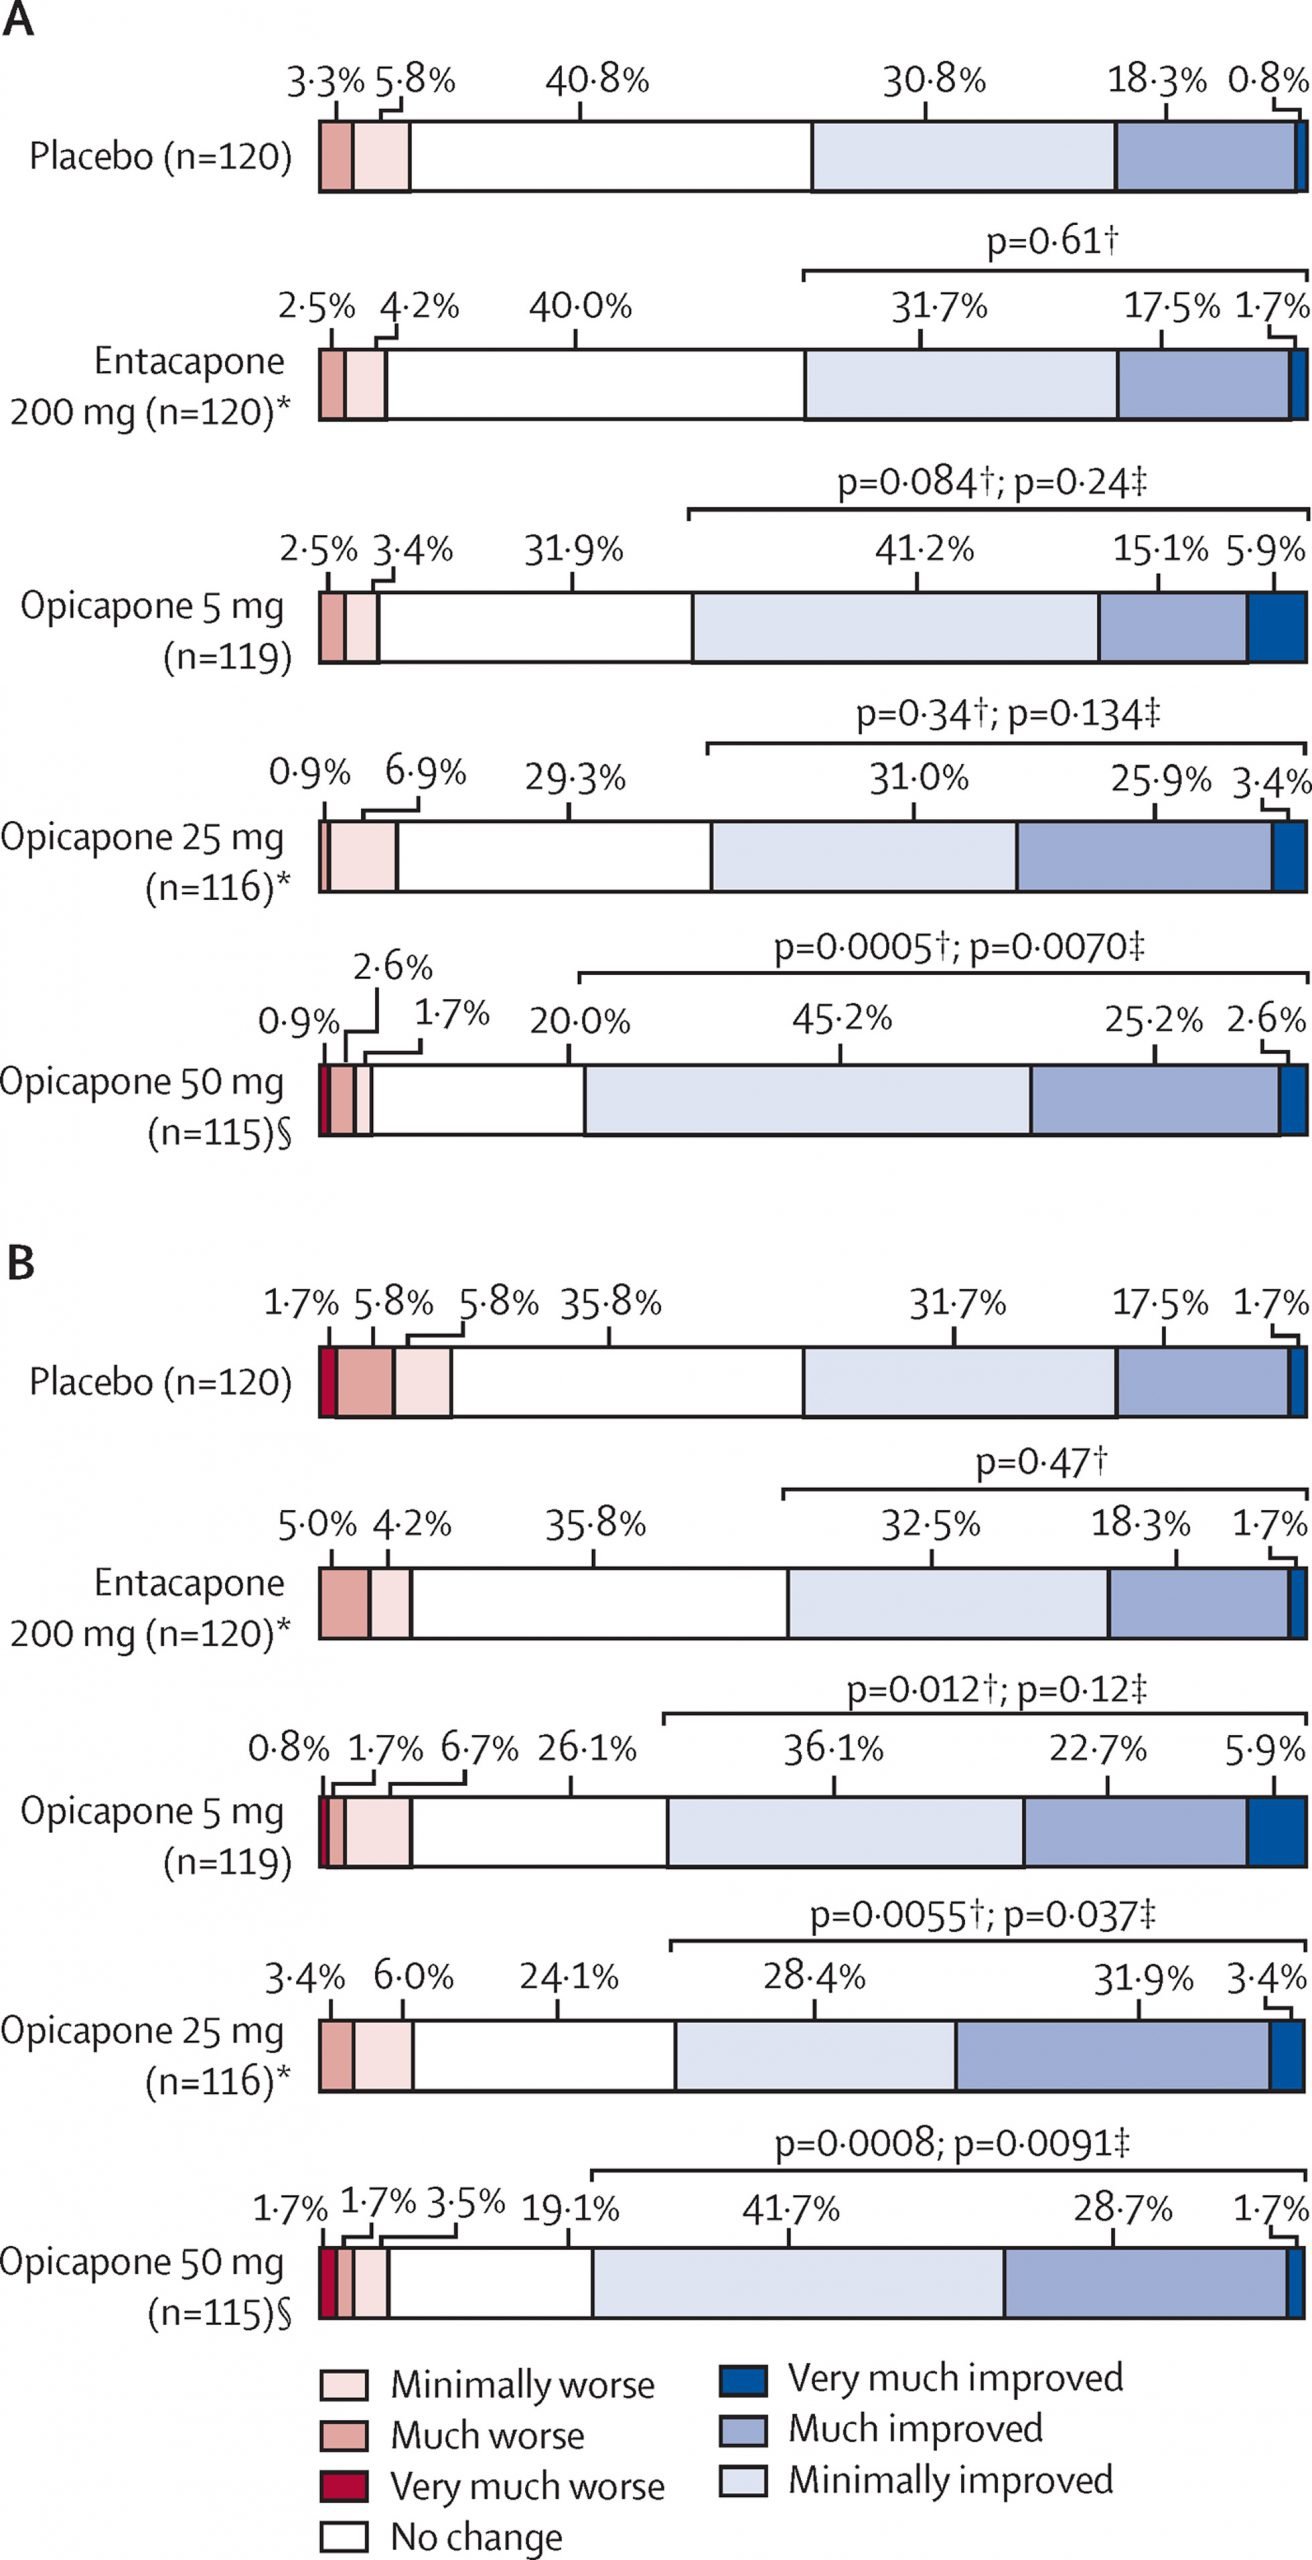 Opicapone as an adjunct to levodopa in patients with Parkinson